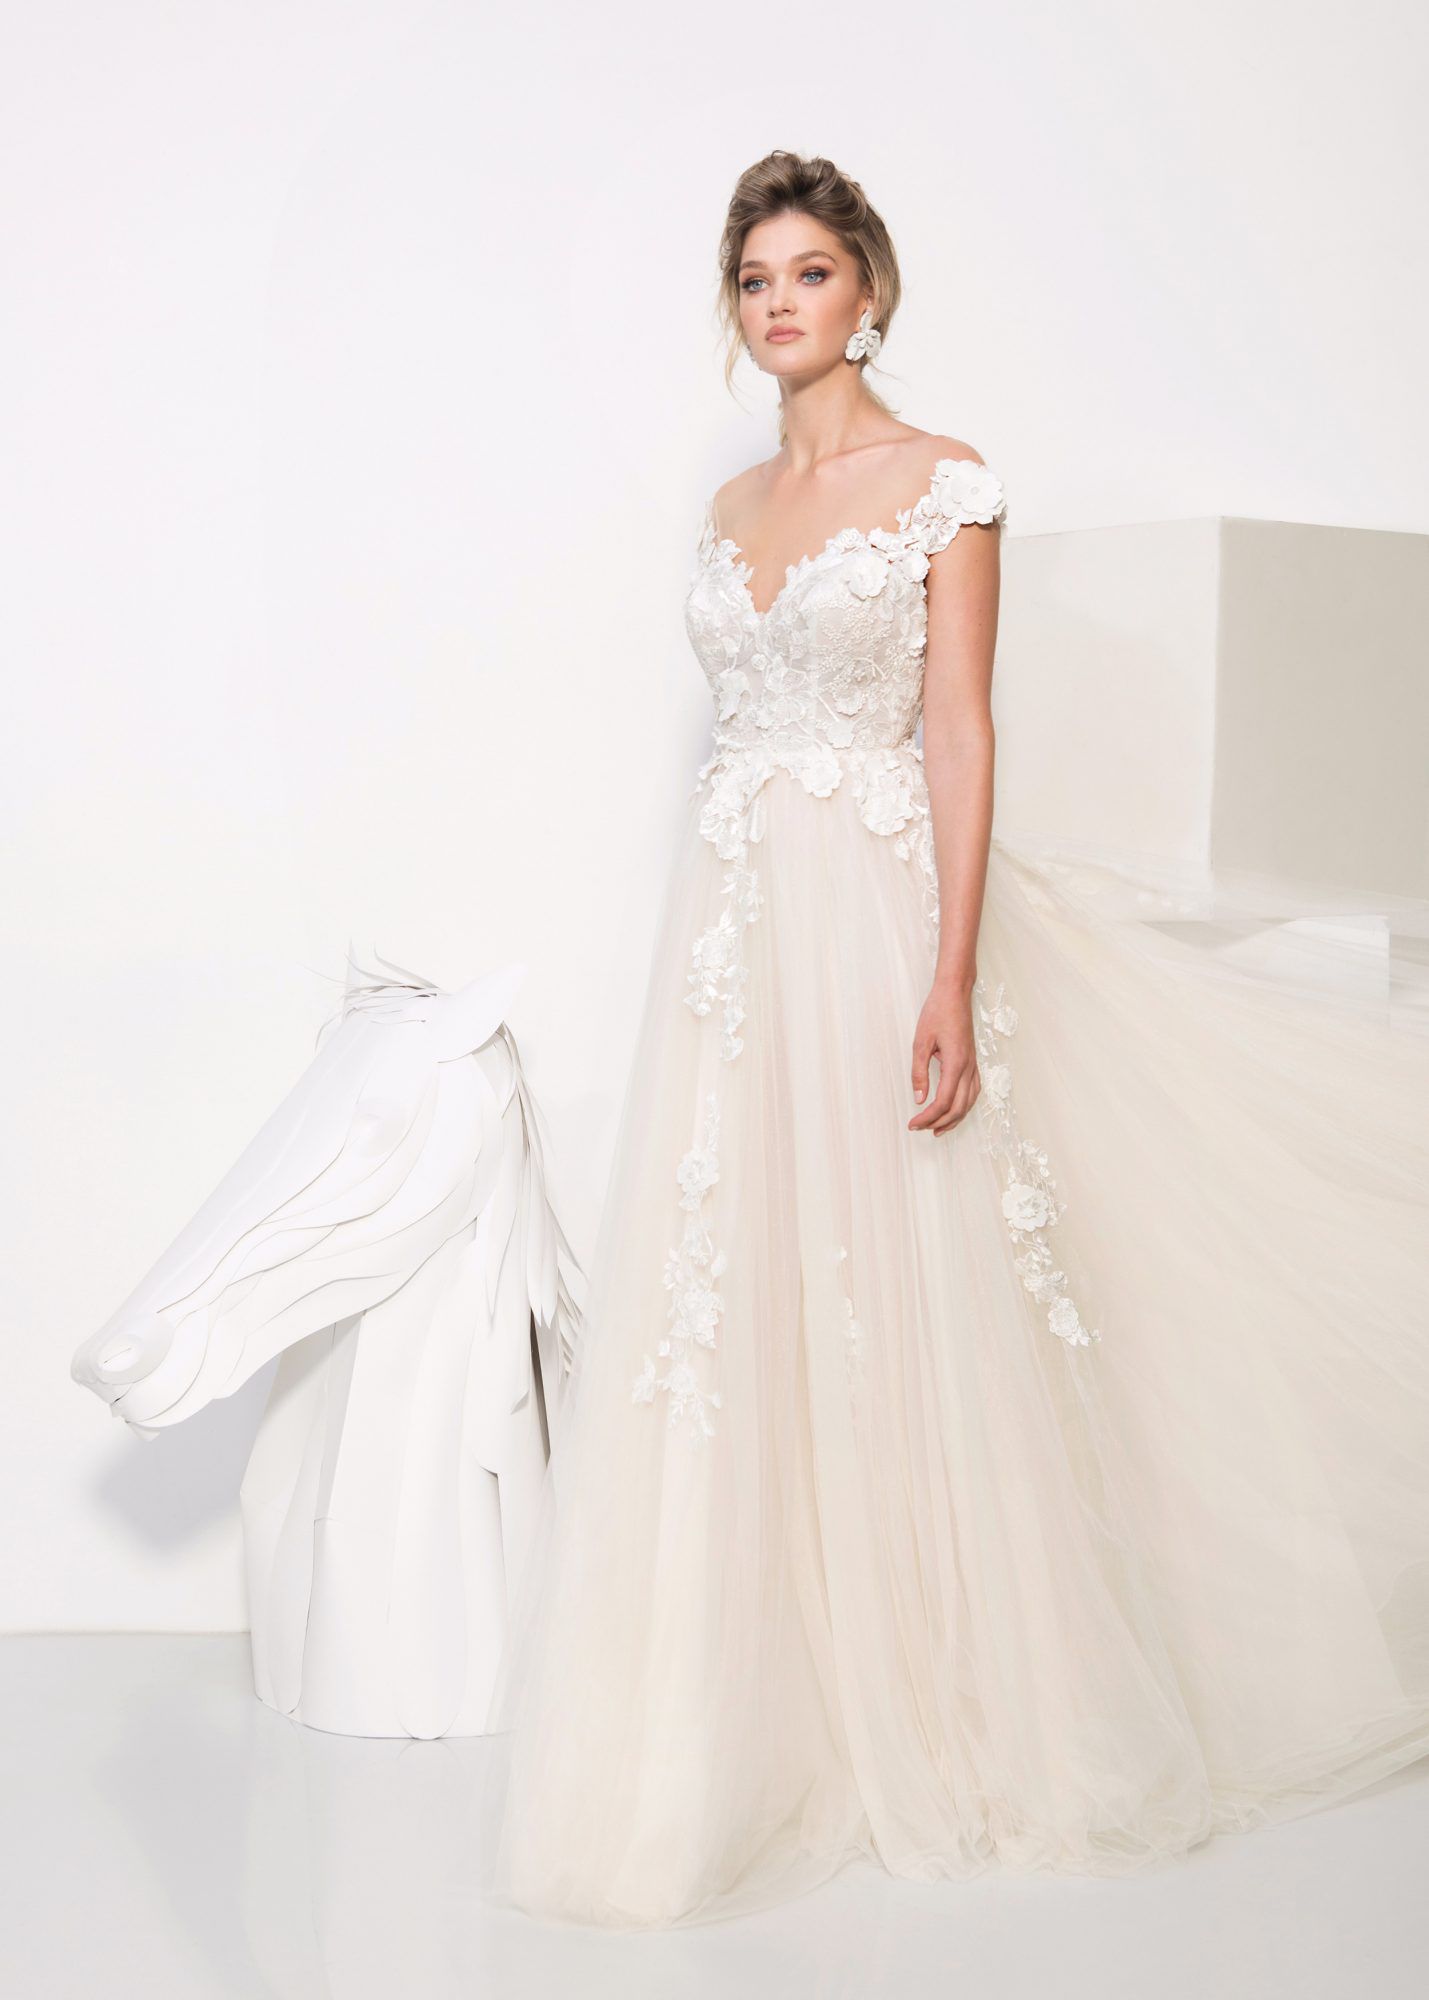 persy wedding dress spring 2019 floral applique sweetheart a-line gown